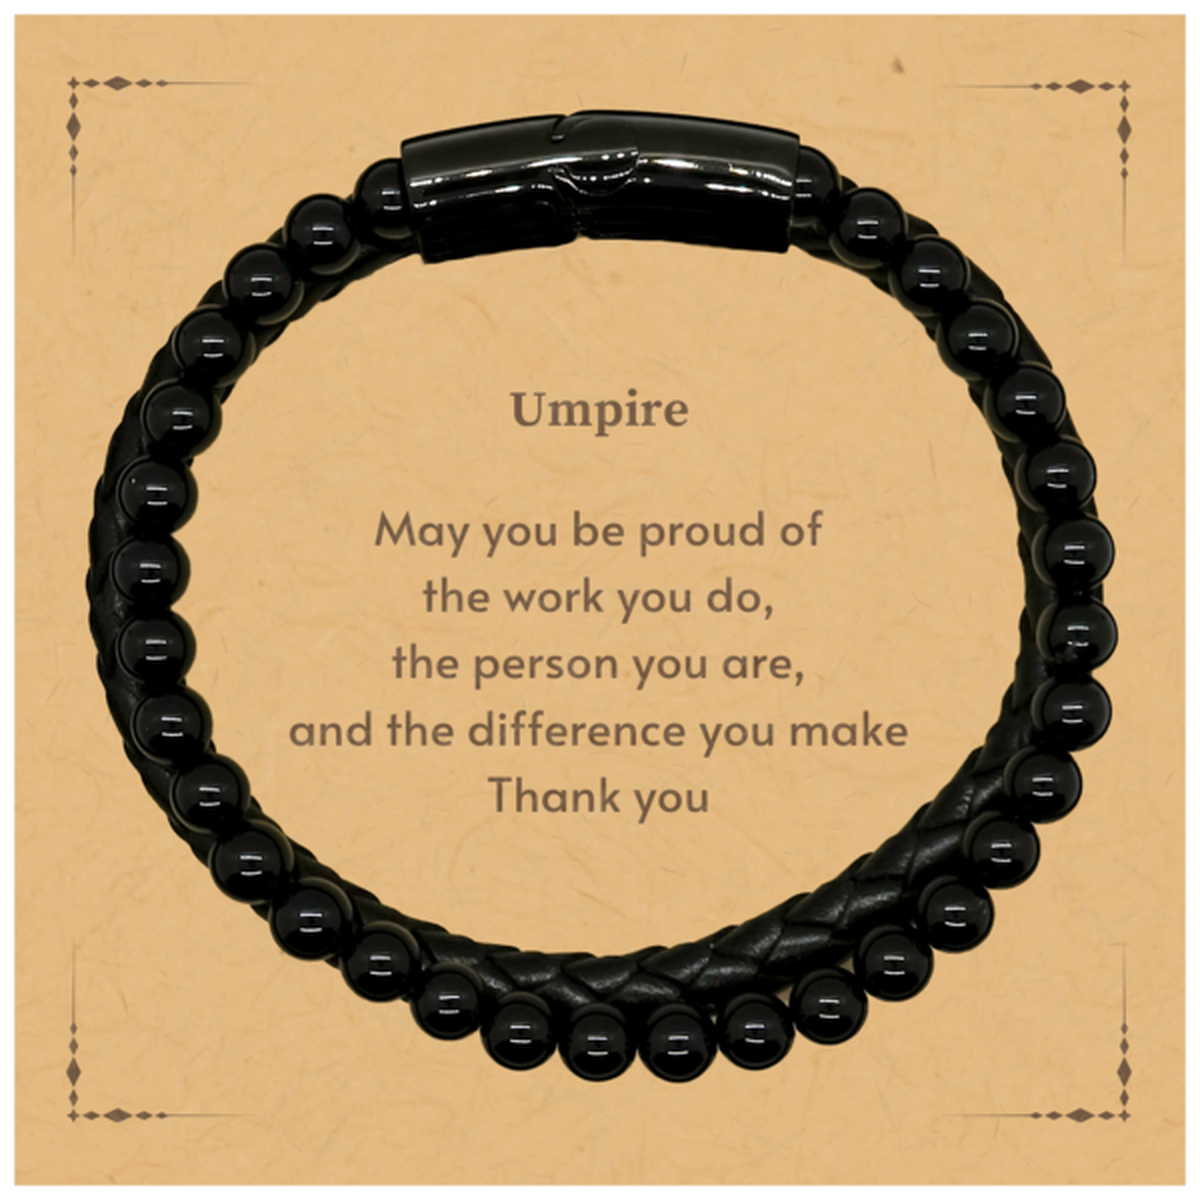 Heartwarming Stone Leather Bracelets Retirement Coworkers Gifts for Umpire, Umpire May You be proud of the work you do, the person you are Gifts for Boss Men Women Friends